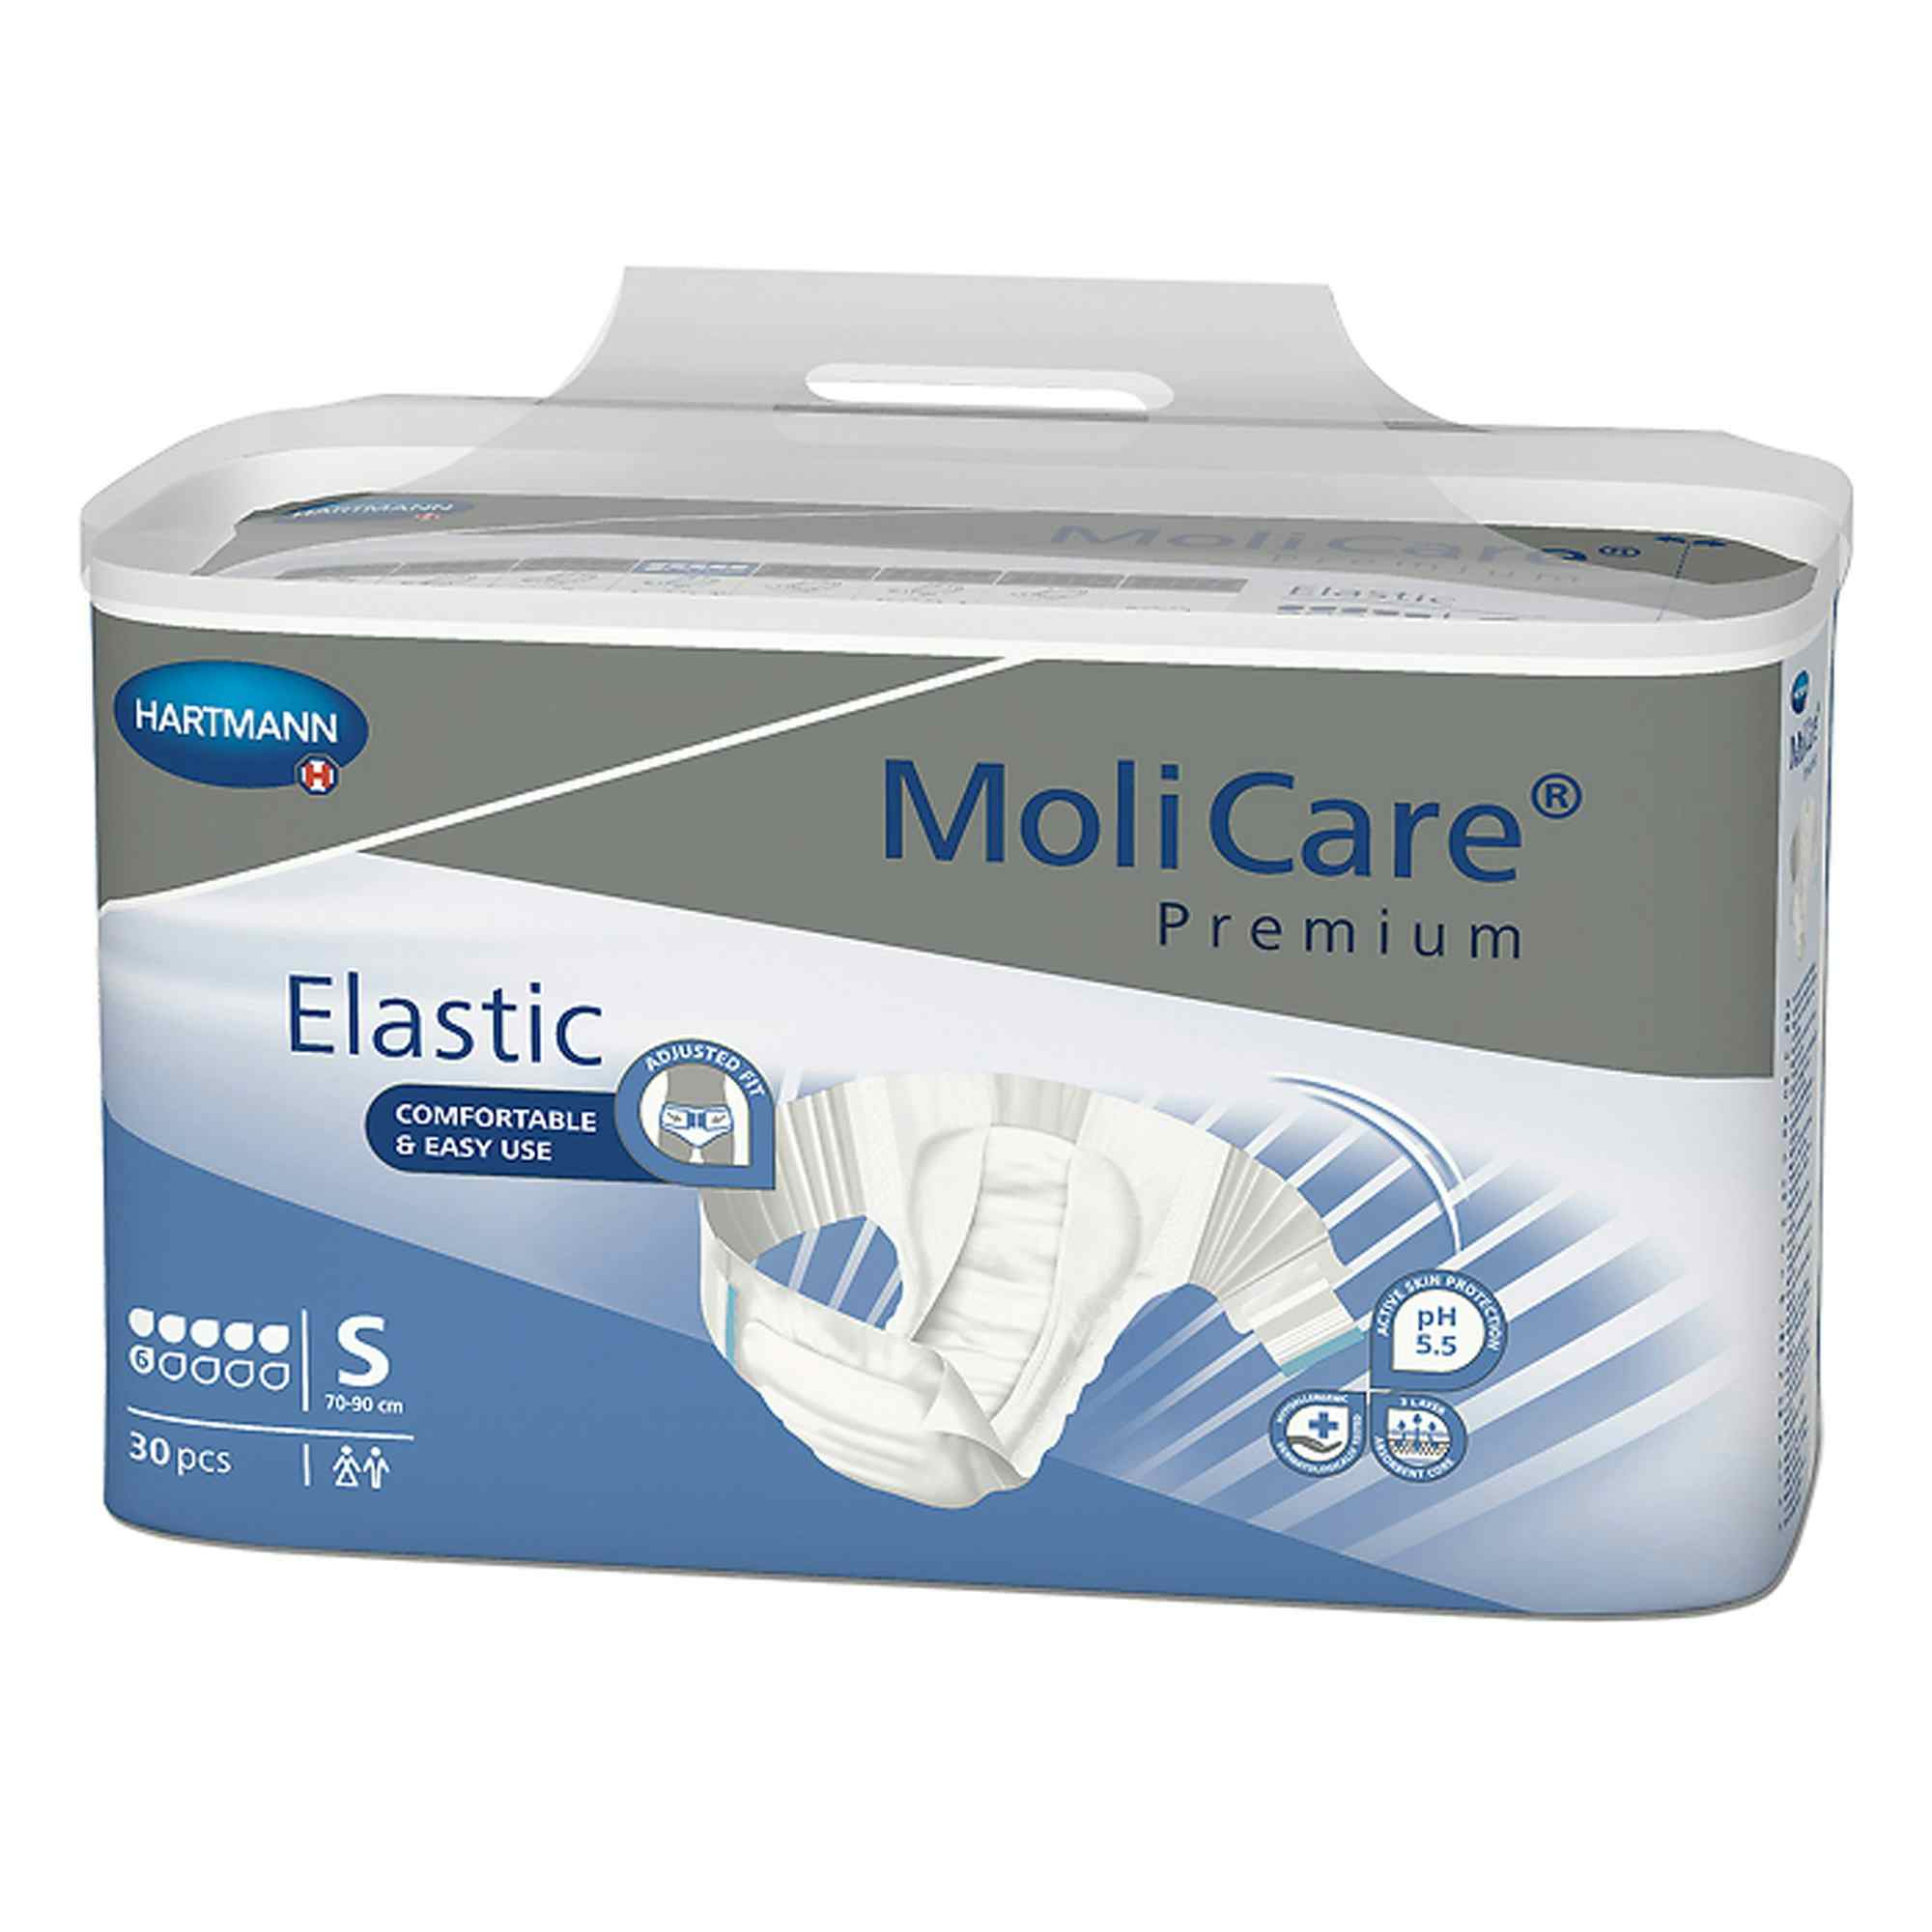 MoliCare Premium Elastic 6D Disposable Brief Adult Diapers with Tabs, Moderate Absorbency, 165271, Small (27-35") - Case of 90